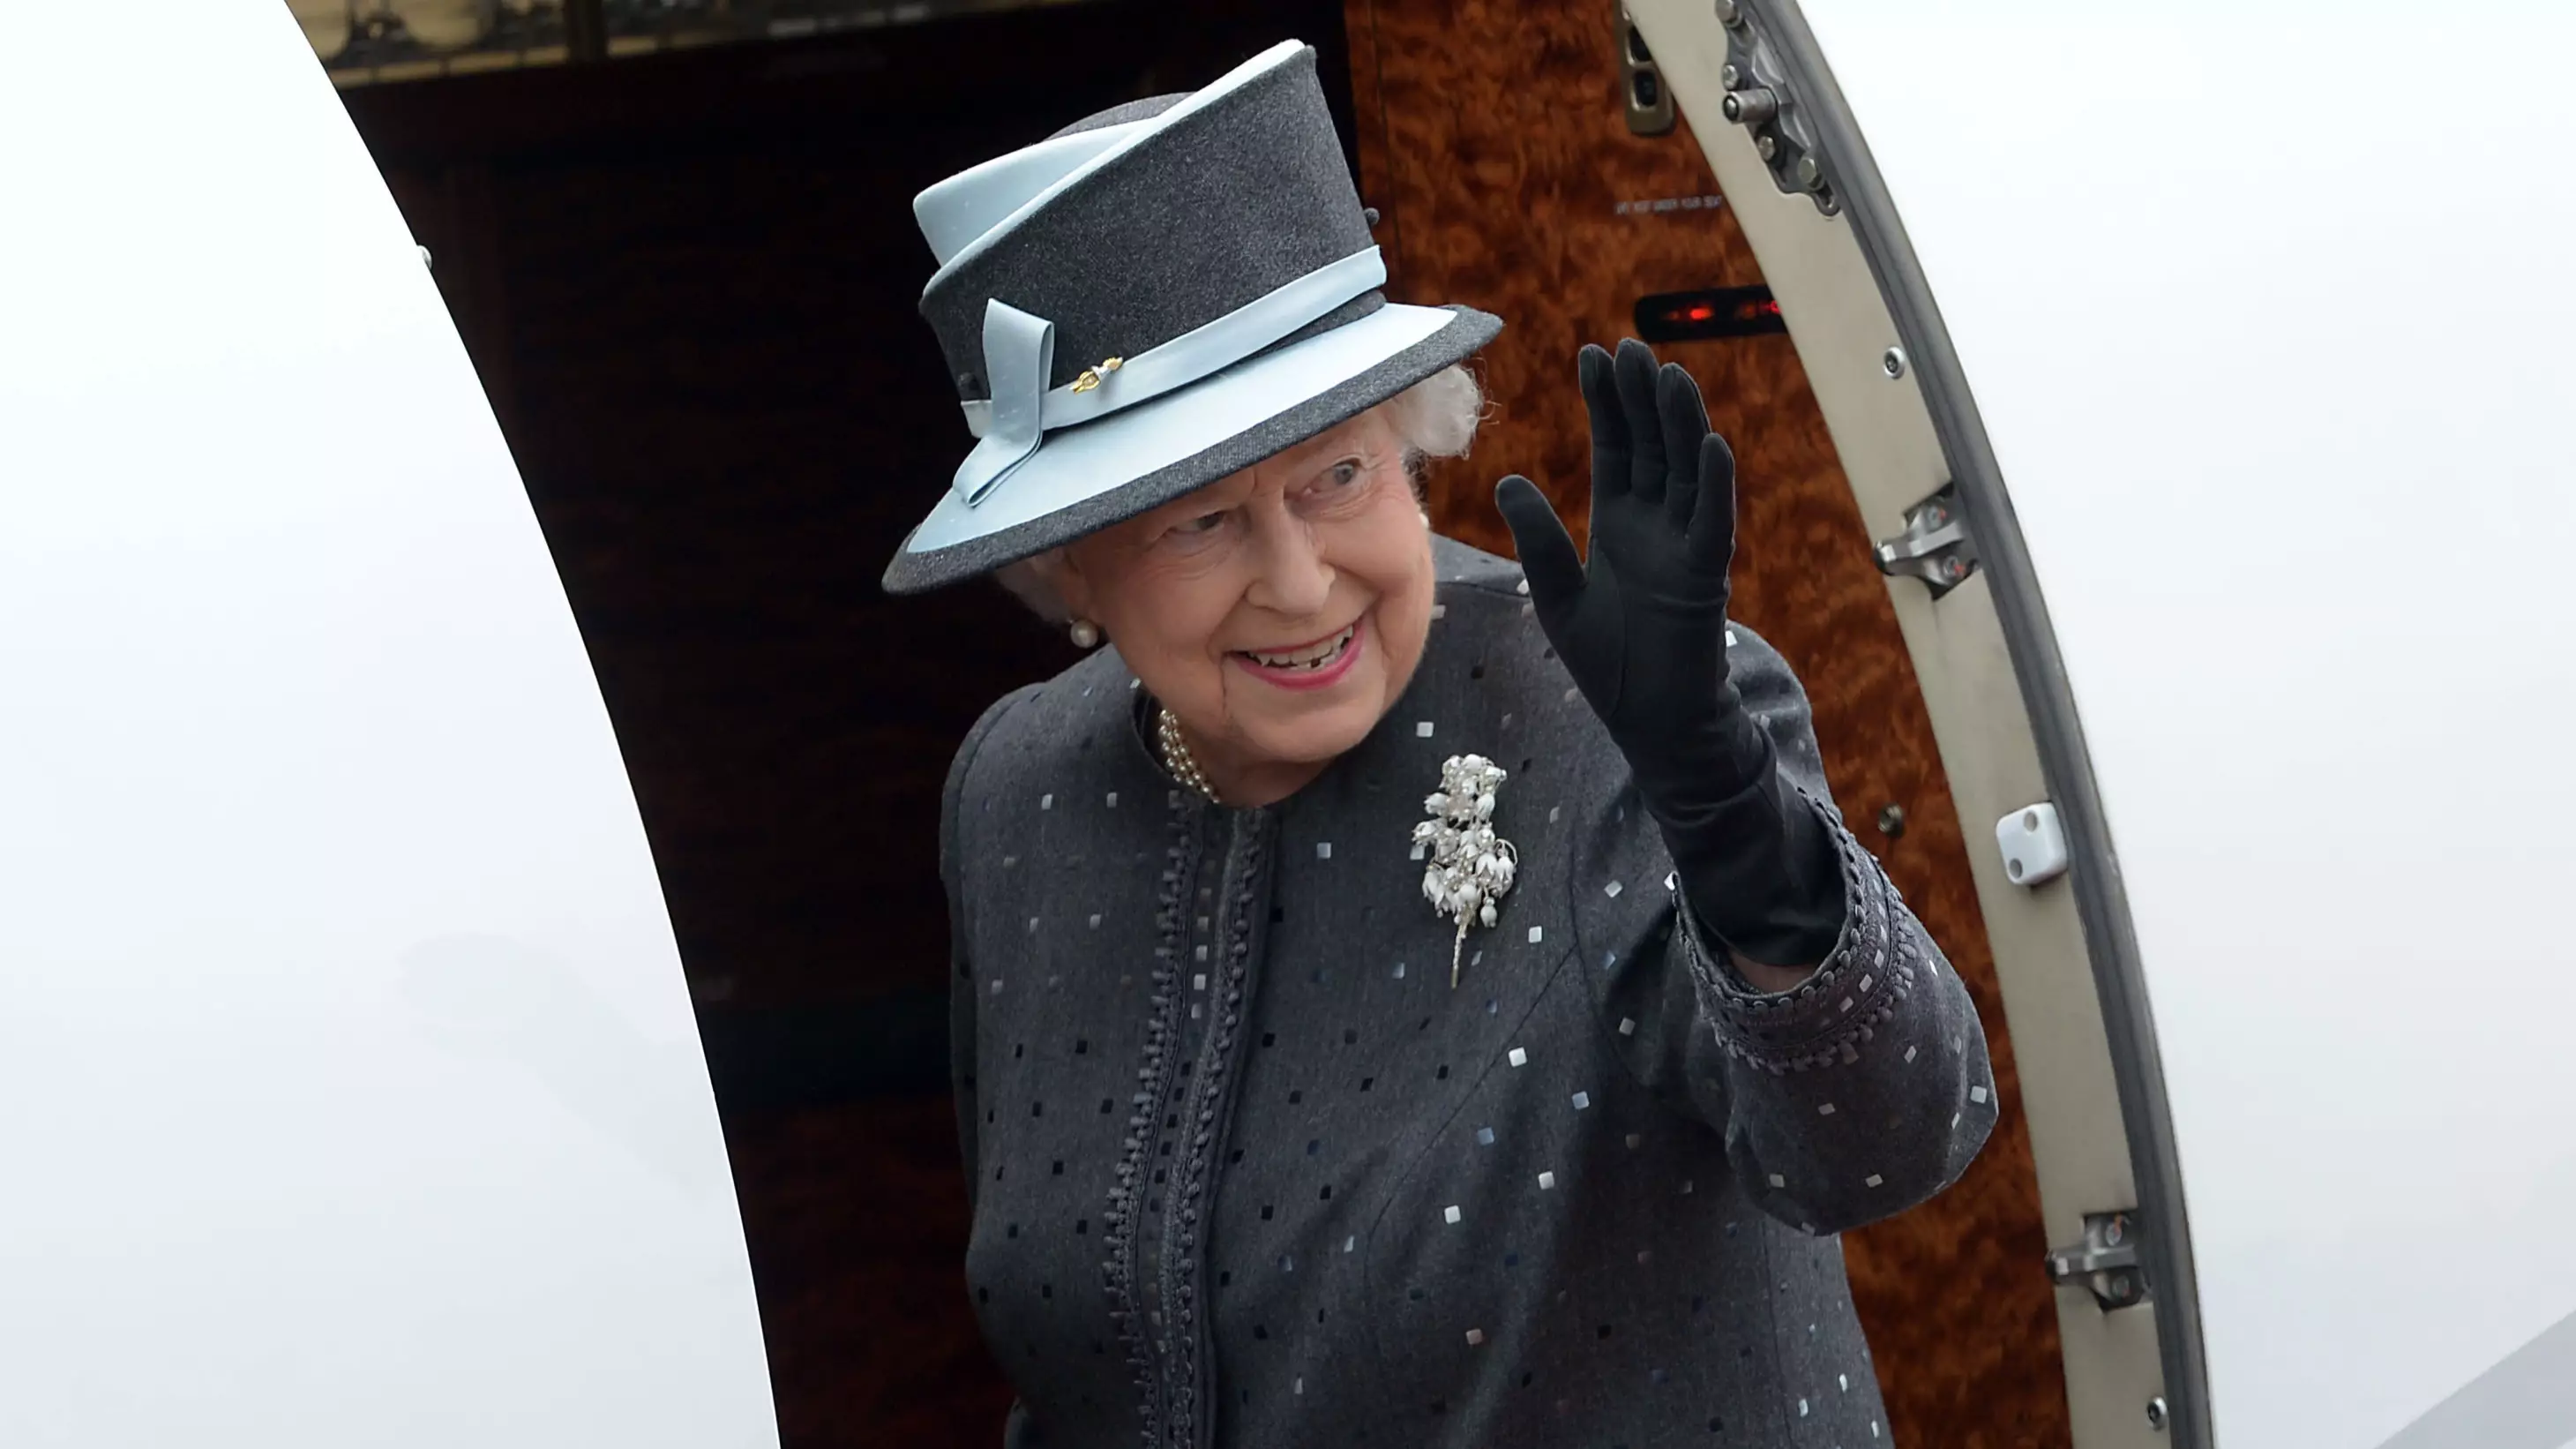 You Can Now Travel With The Queen For A Living And Get Paid £85,000